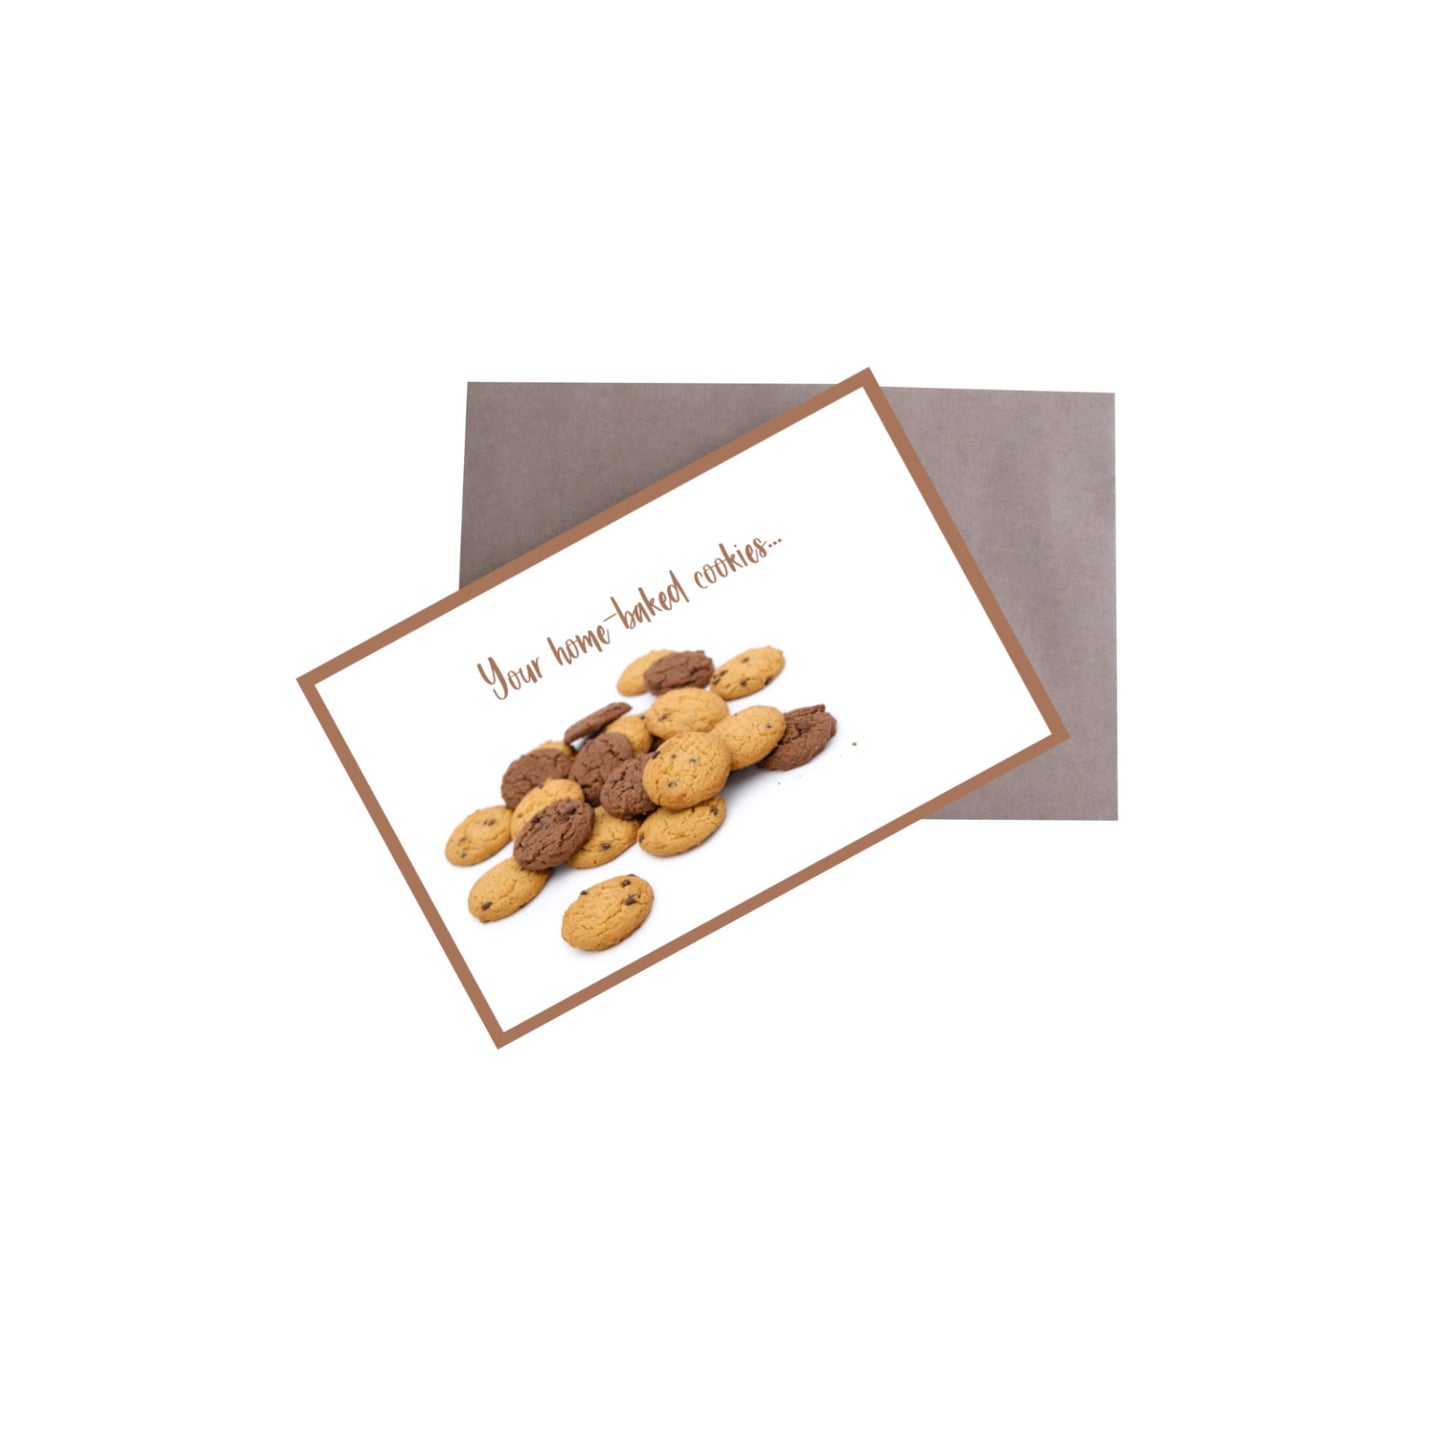 Your home-baked cookies 8.5x5.5 Landscape Greeting Card Front with Brown Envelope